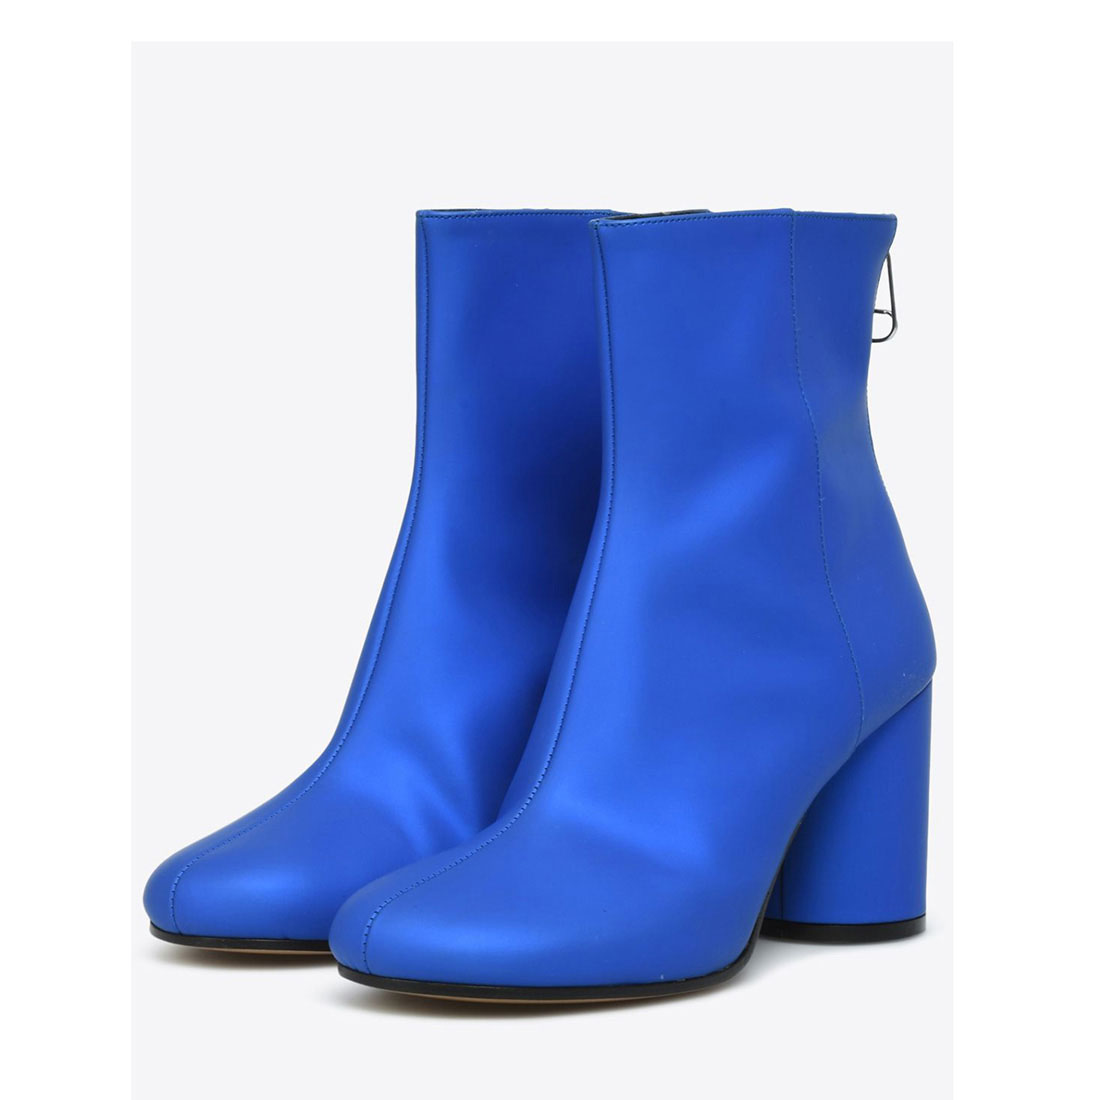 Fabric upper fashion blue high heel plain cheap boots shoes for ladies ...